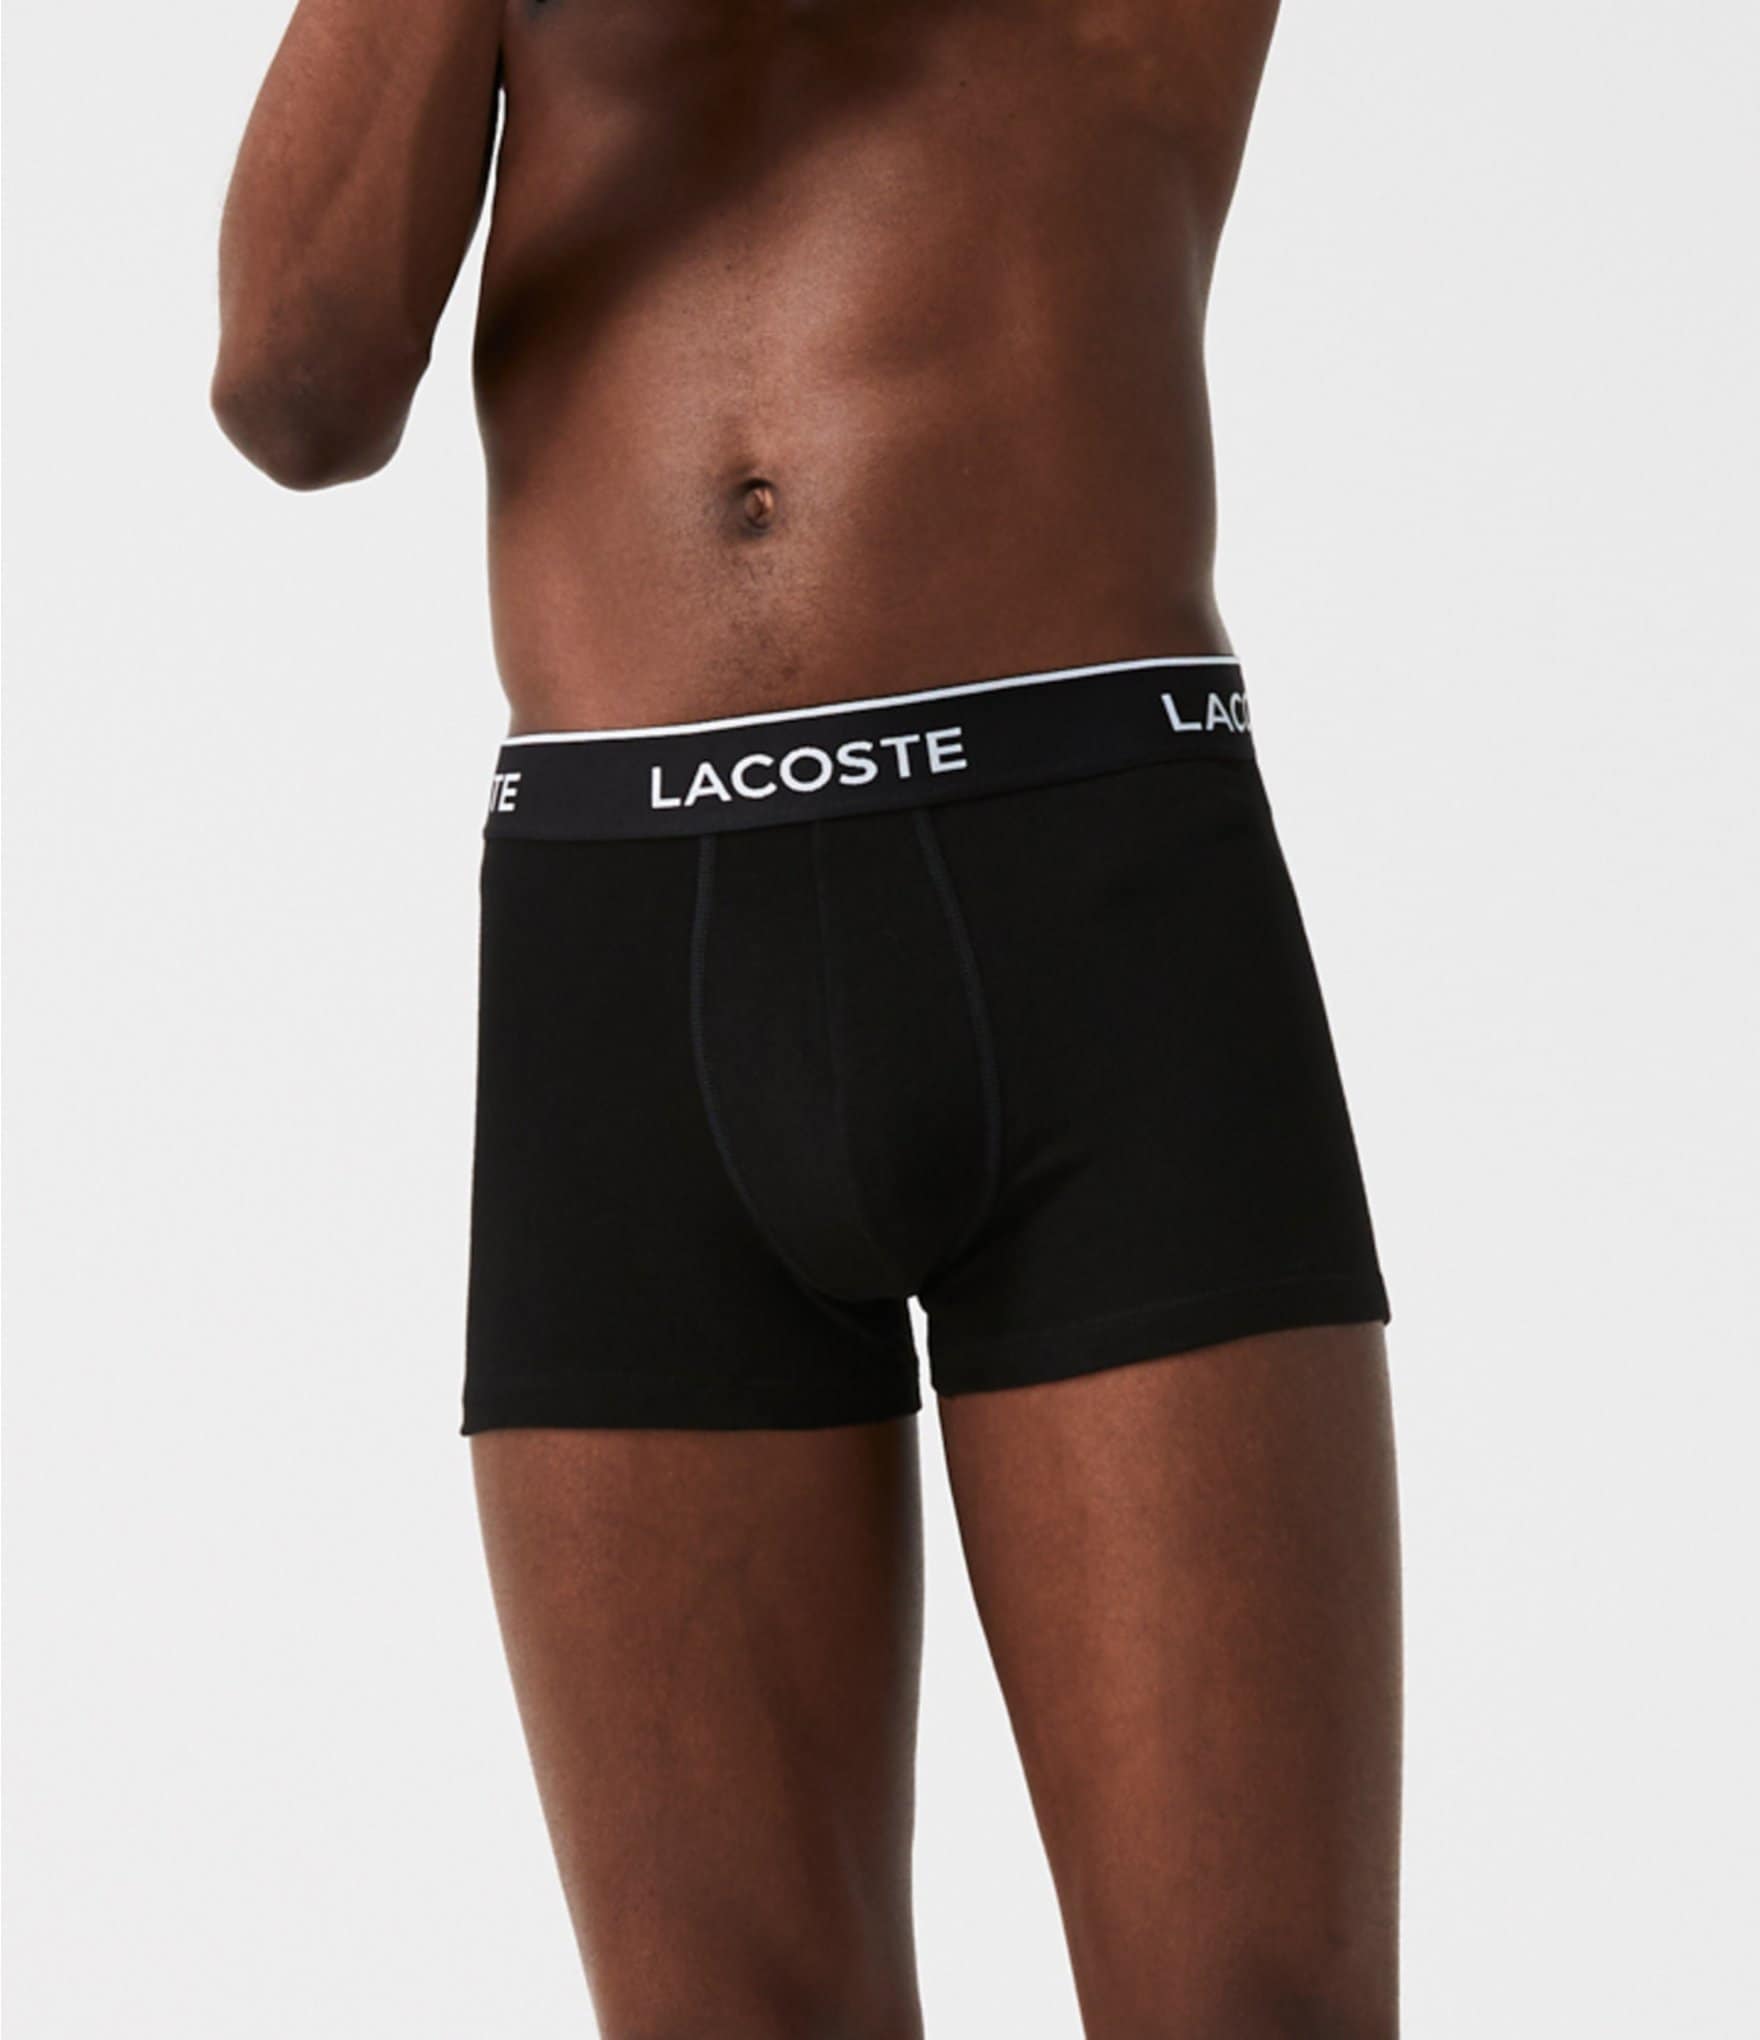 Lacoste Boxer Shorts Men with Print Black - Multi Grey 3-Pack